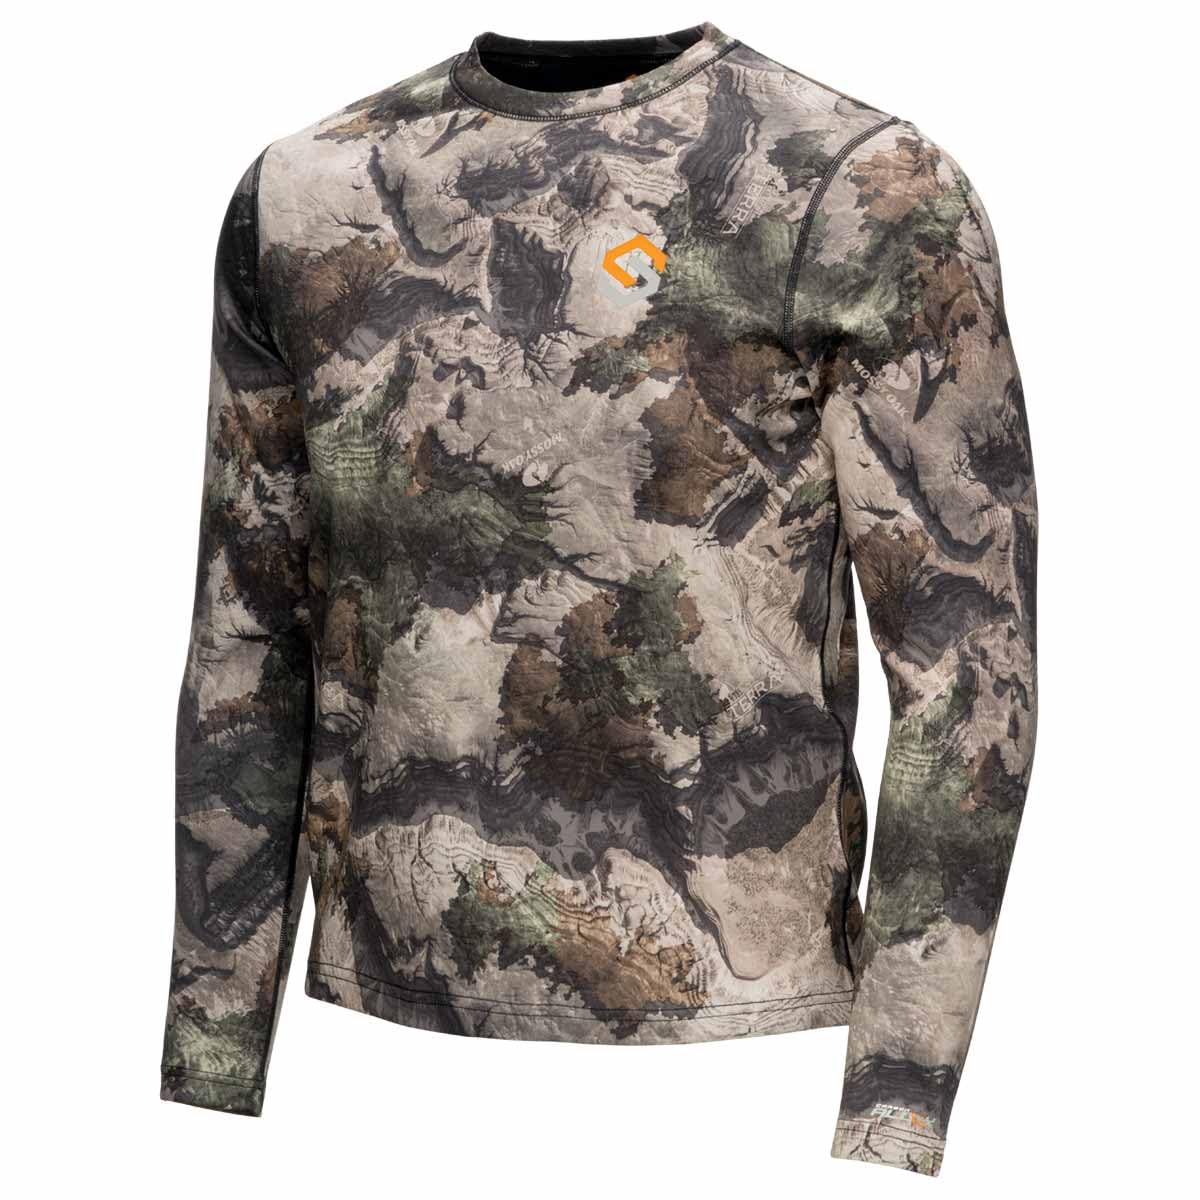 ScentLok ClimaFleece BaseSlayers Midweight Base-Layer Shirt, Hunting Clothes for Men and Women - Mossy Oak Terra Gila